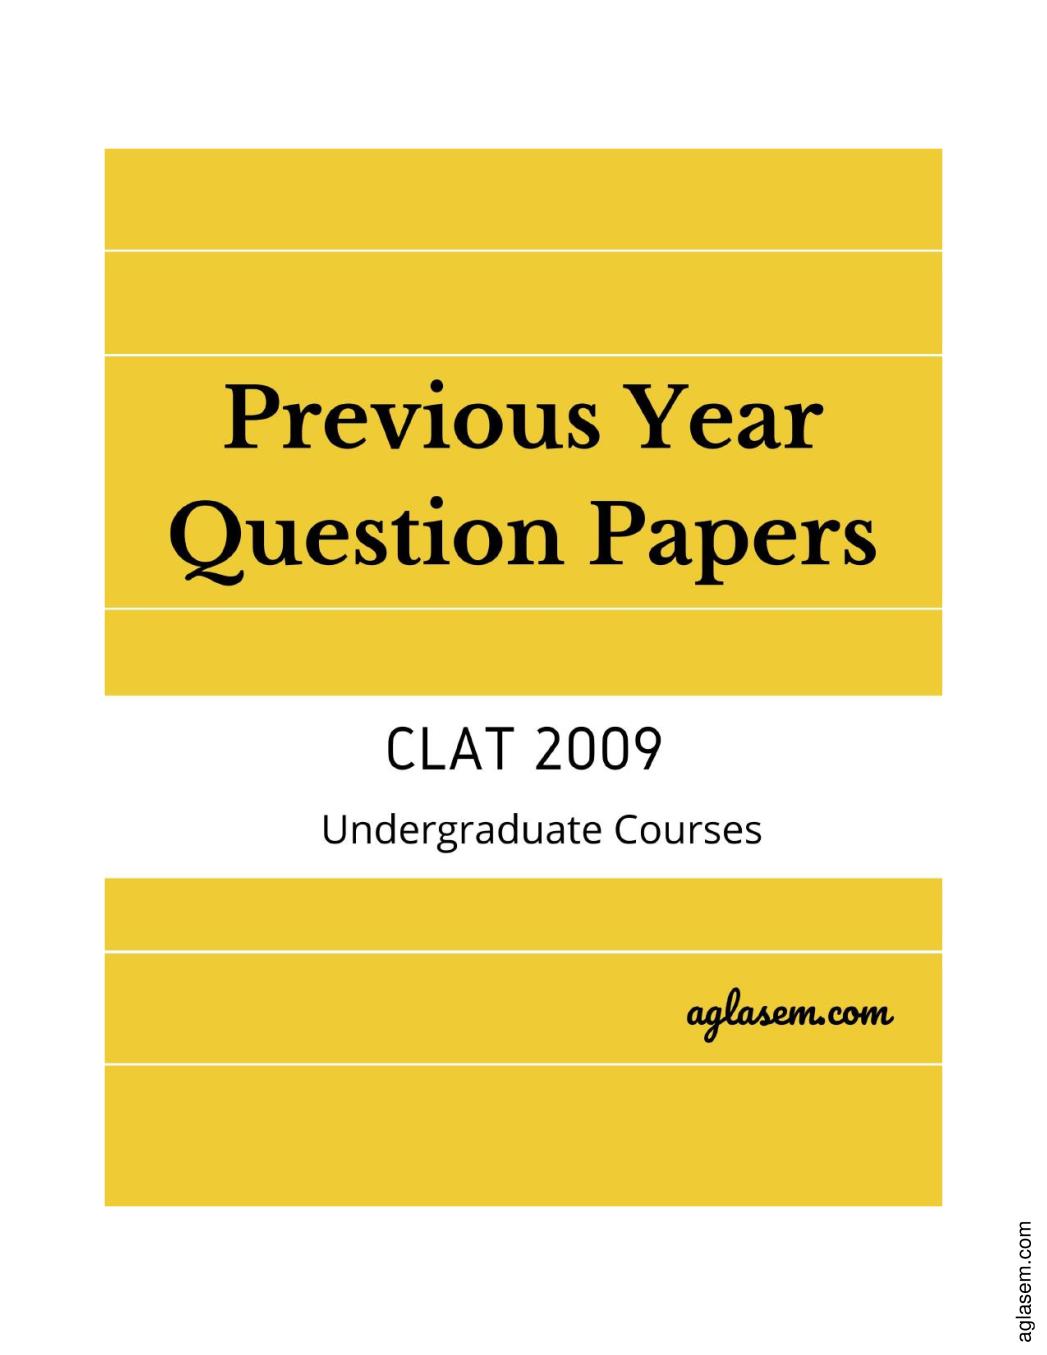 CLAT 2009 Question Paper - Page 1